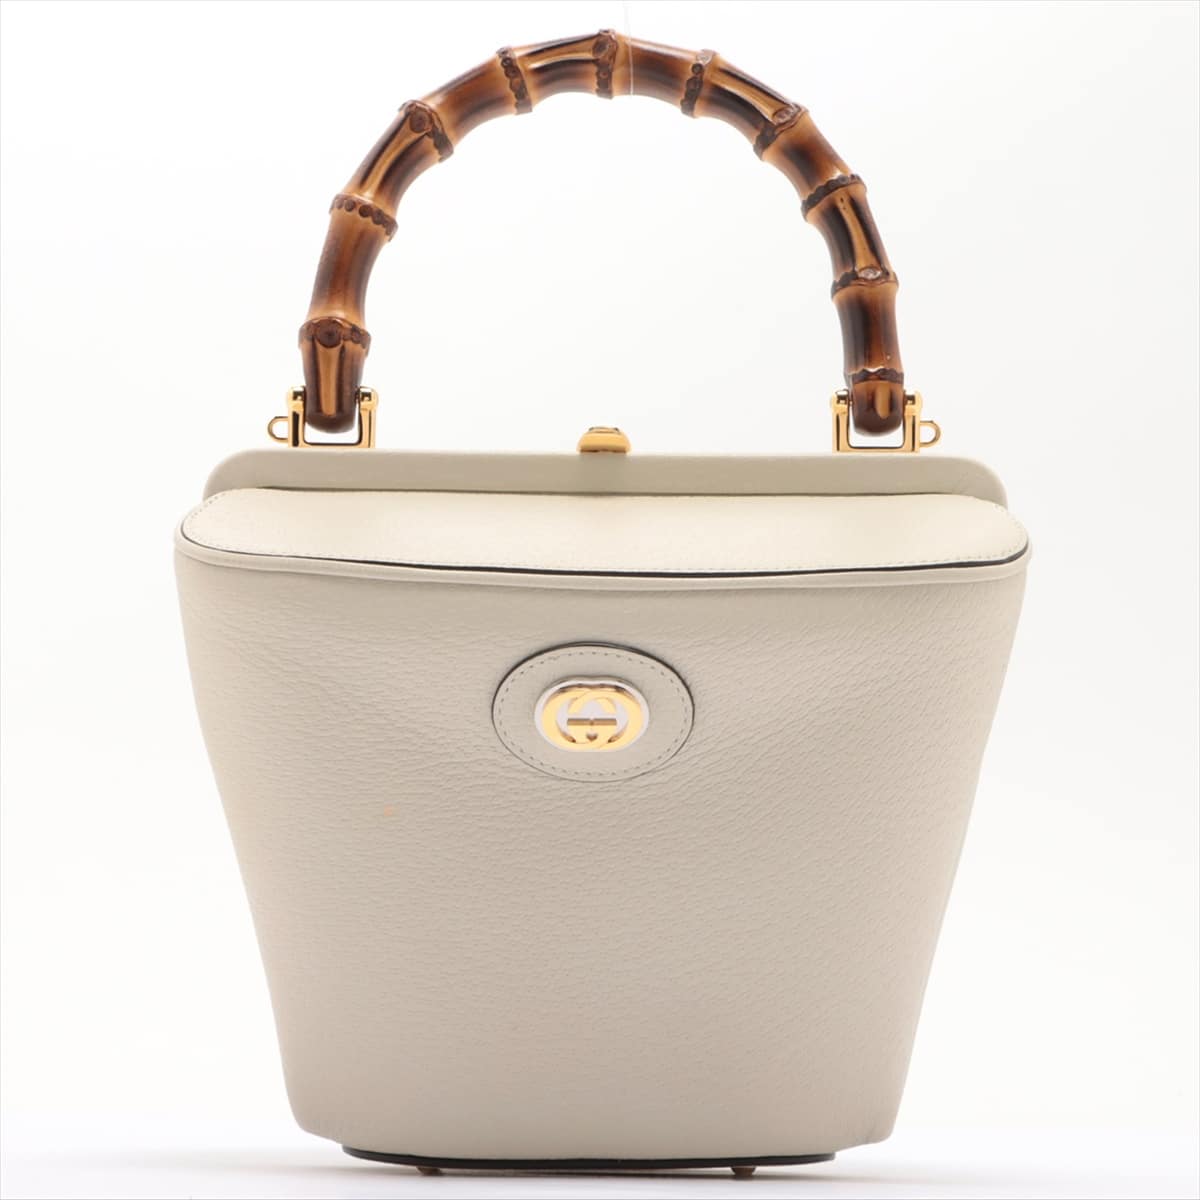 Gucci Bamboo Leather 2way handbag Beige 616437 [Limited to Japan]